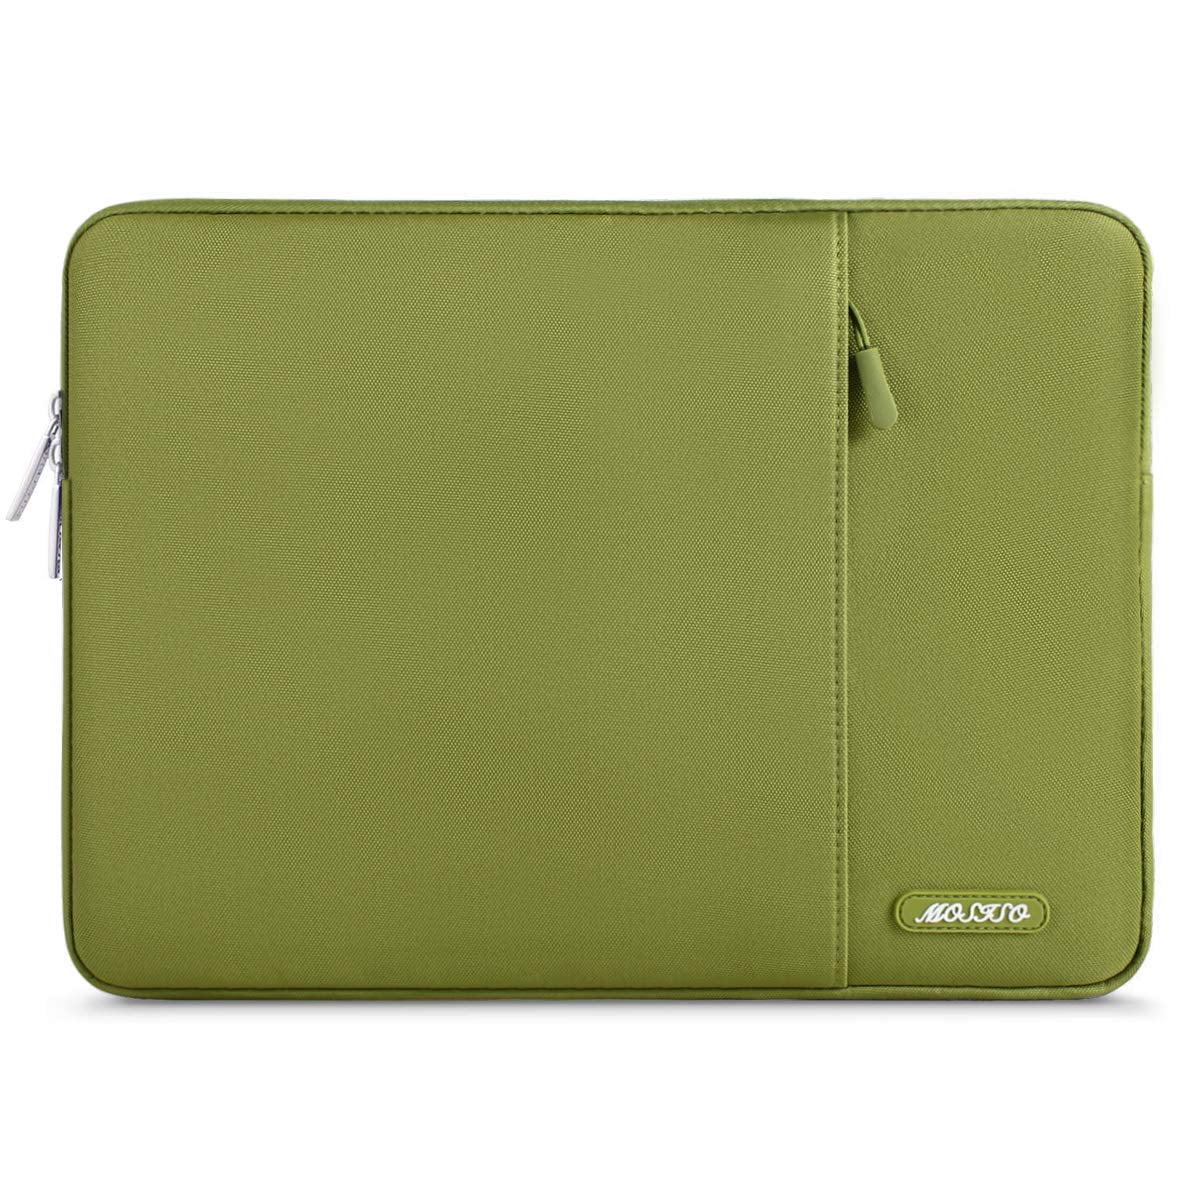 Air Sleeve Case for 13-13.3 Inch MacBook Pro/MacBook Protective Bag 